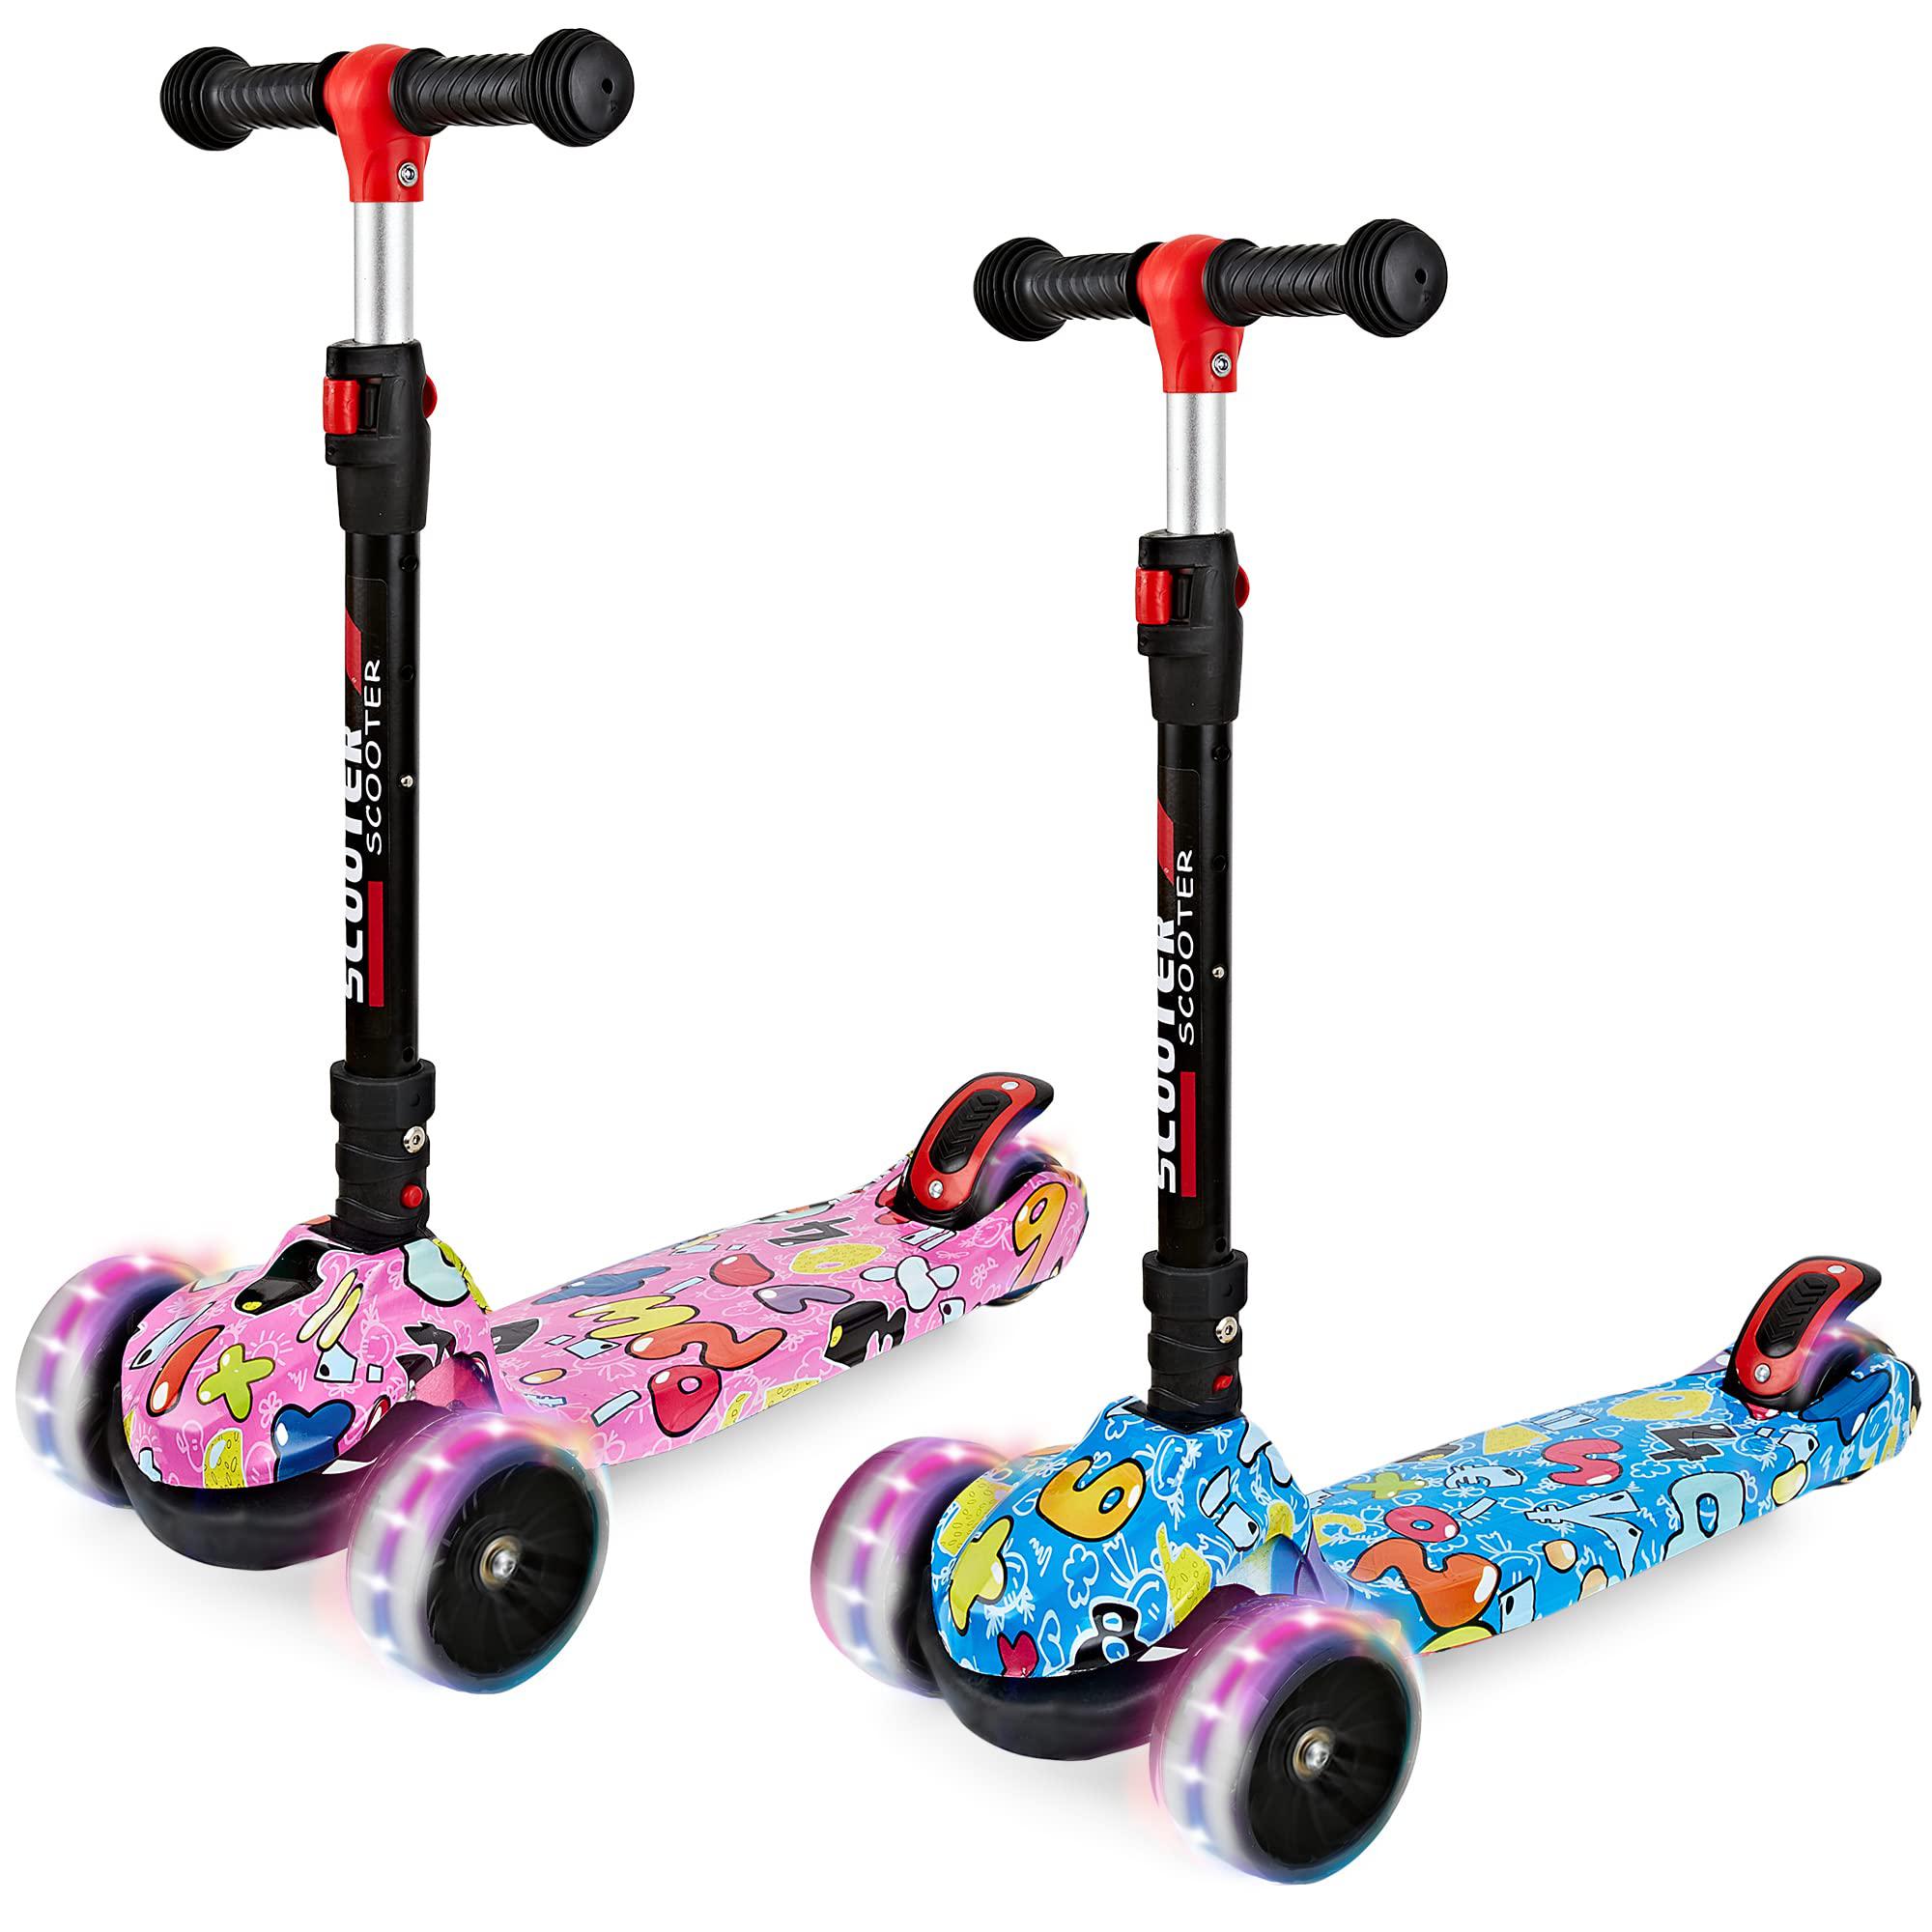 HOOJIN scooter for kids ages 3-12, foldable kick scooter with extra wide pu light-up wheels, height adjustable 3 wheel scooter with 